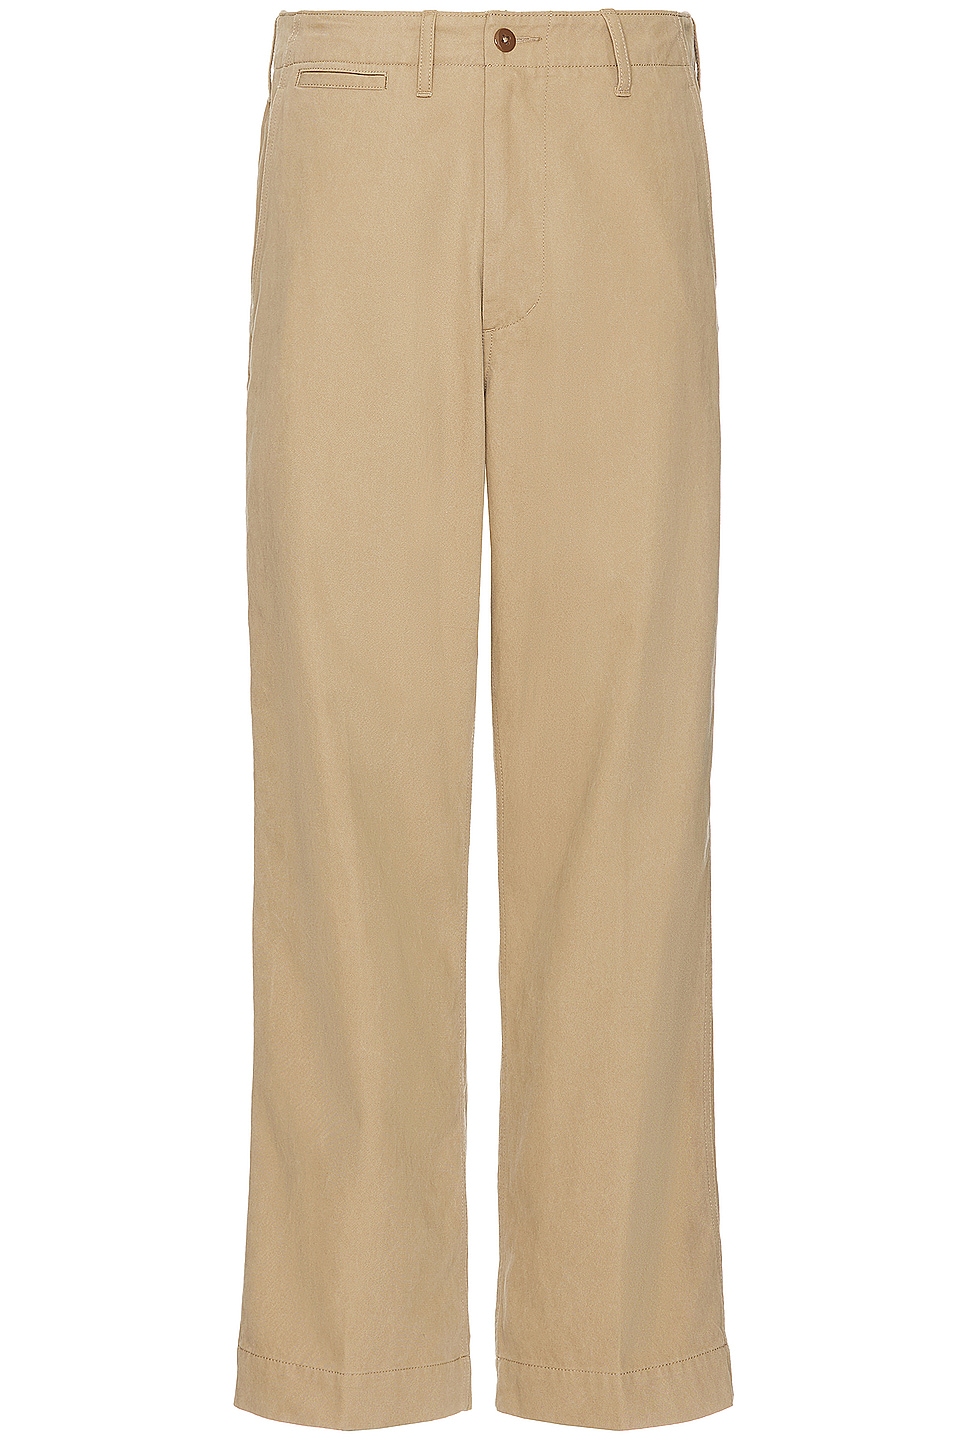 Image 1 of Beams Plus Mil Trousers Twill in Khaki